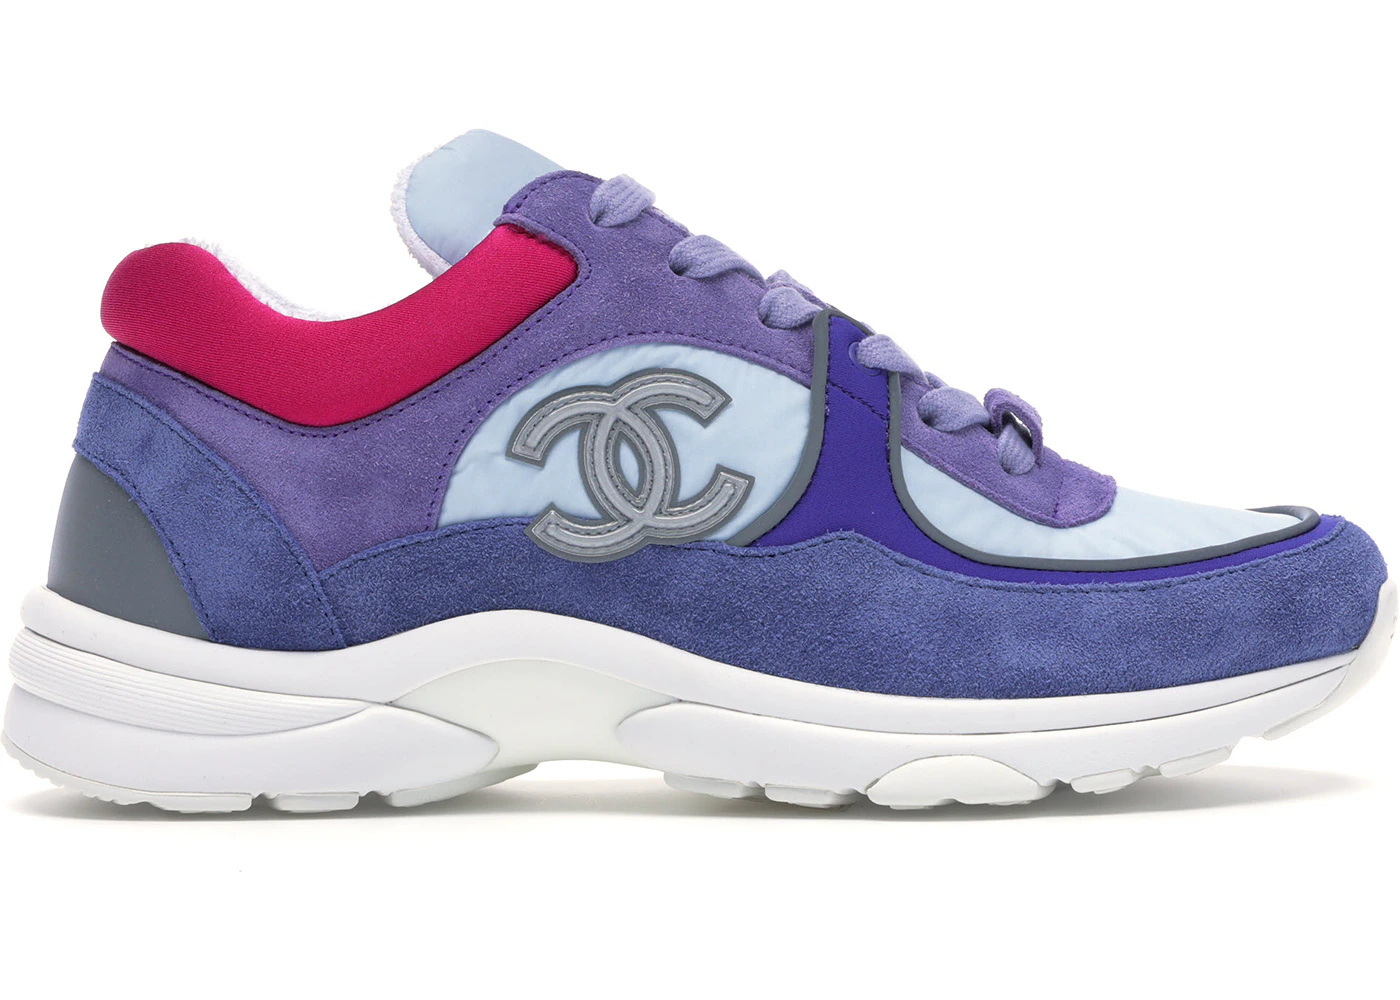 chanel top trainers